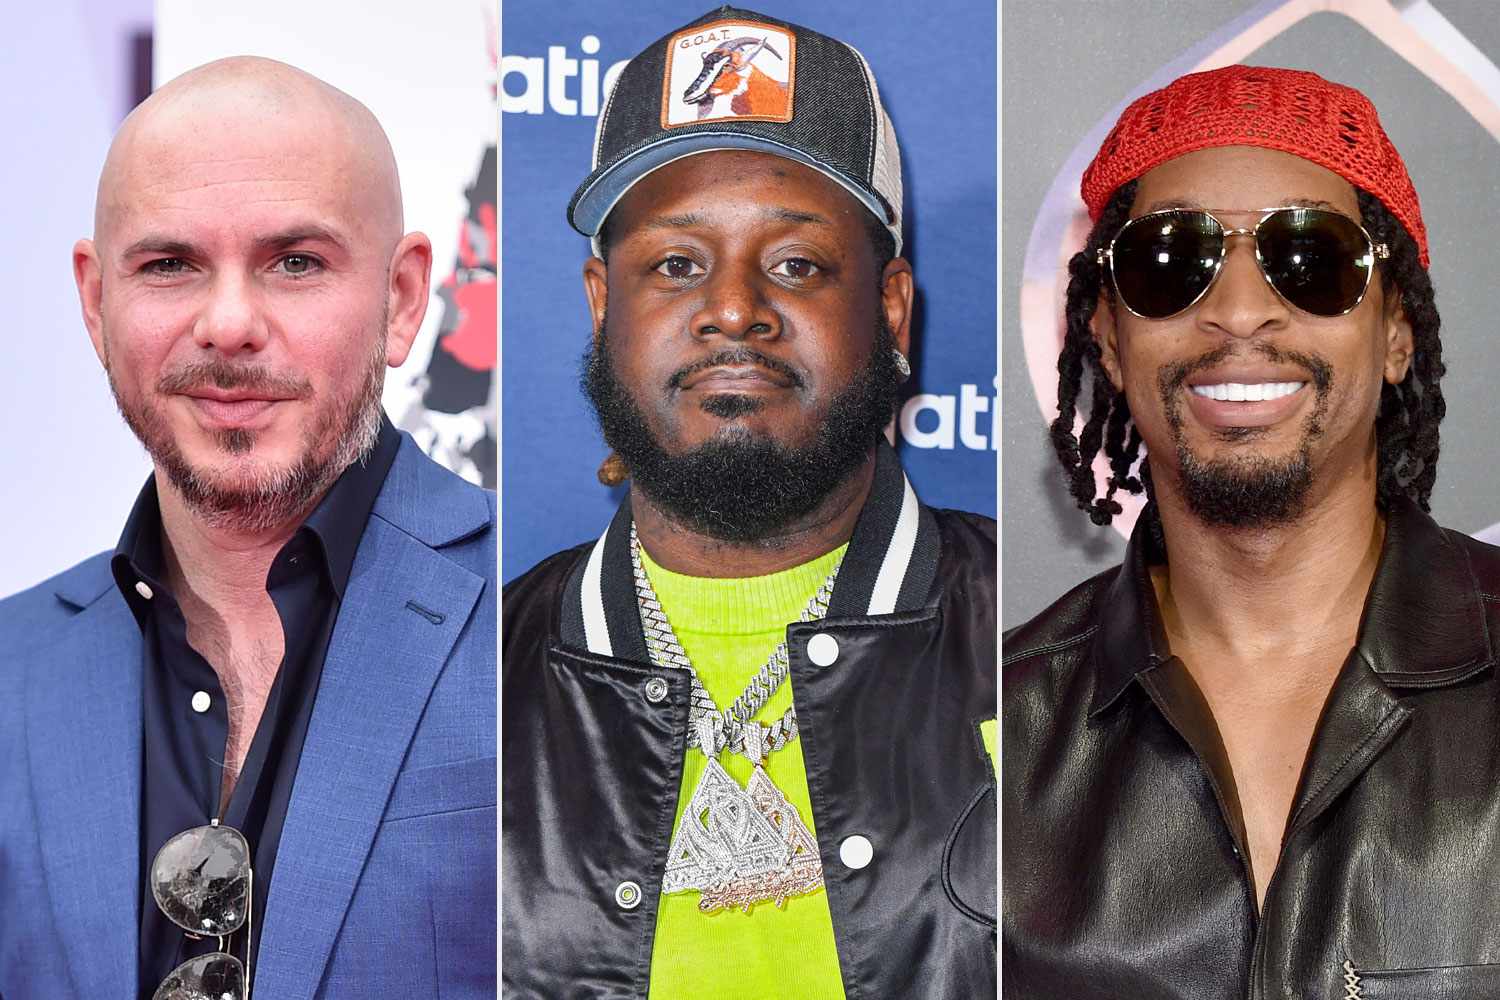 Pitbull Announces Dates for Upcoming Party After Dark Tour with T-Pain and Lil Jon: 'Get Ready'